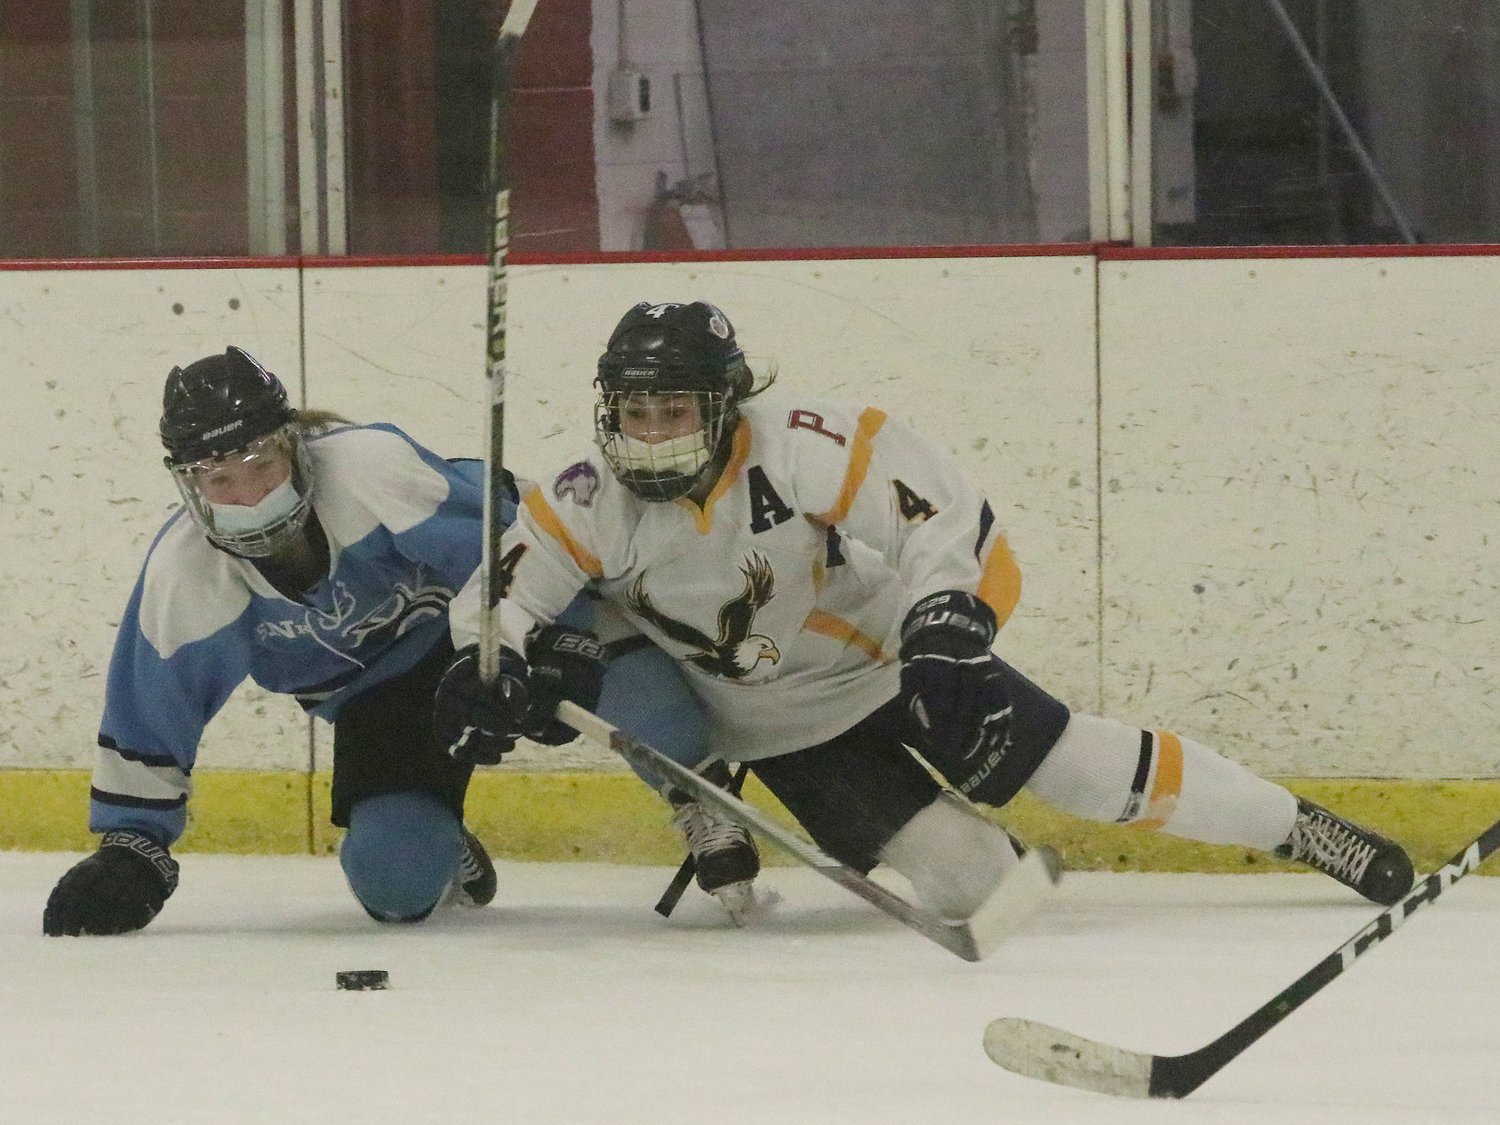 Marissa Levreault gets taken down while breaking up ice in Game 2.